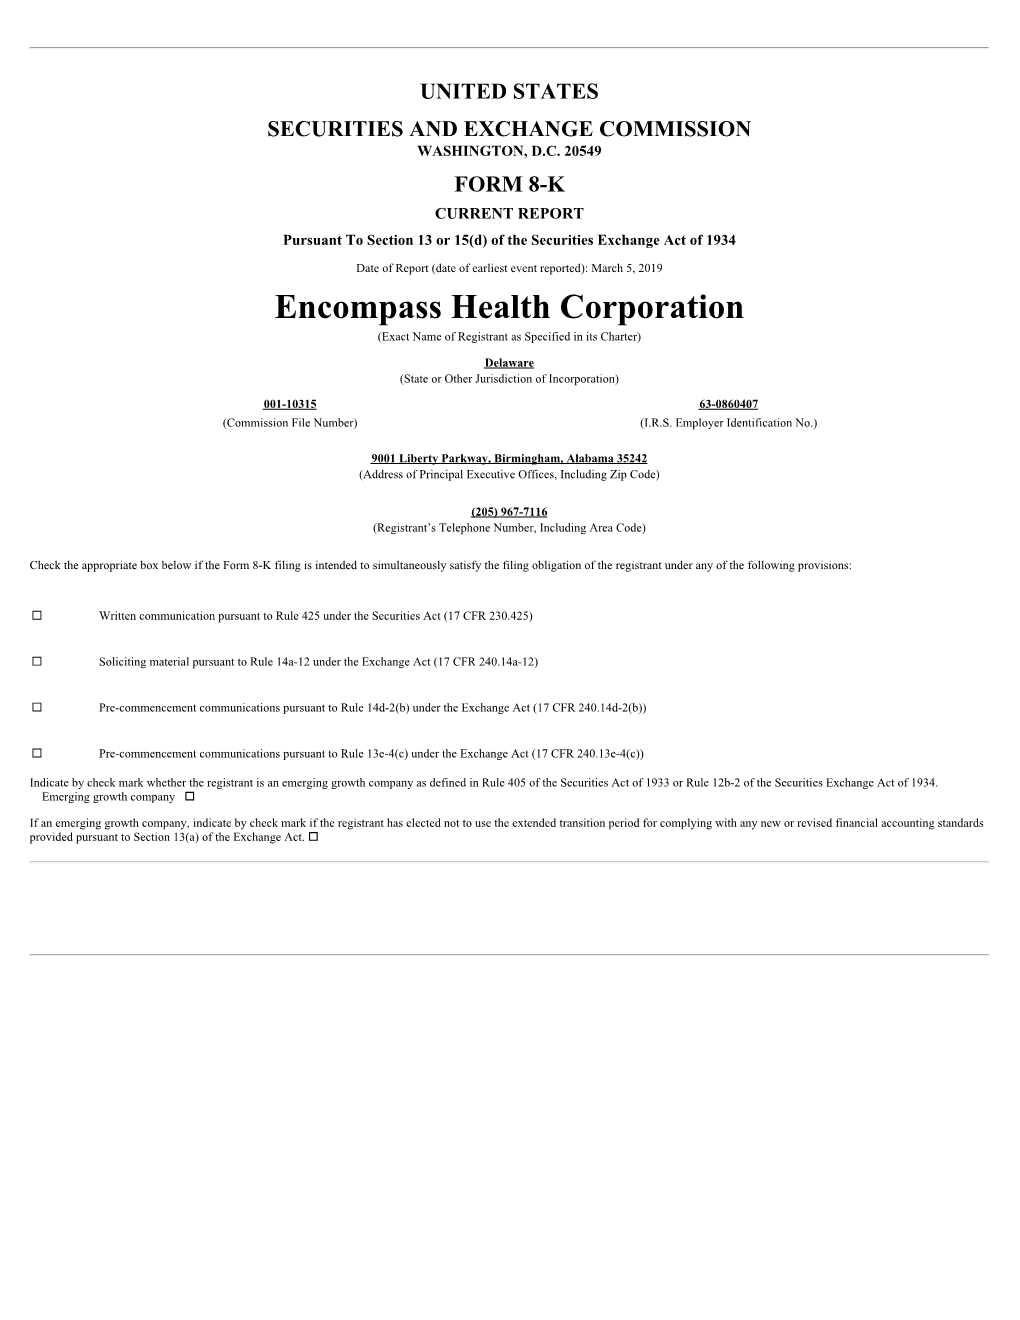 Encompass Health Corporation (Exact Name of Registrant As Specified in Its Charter)